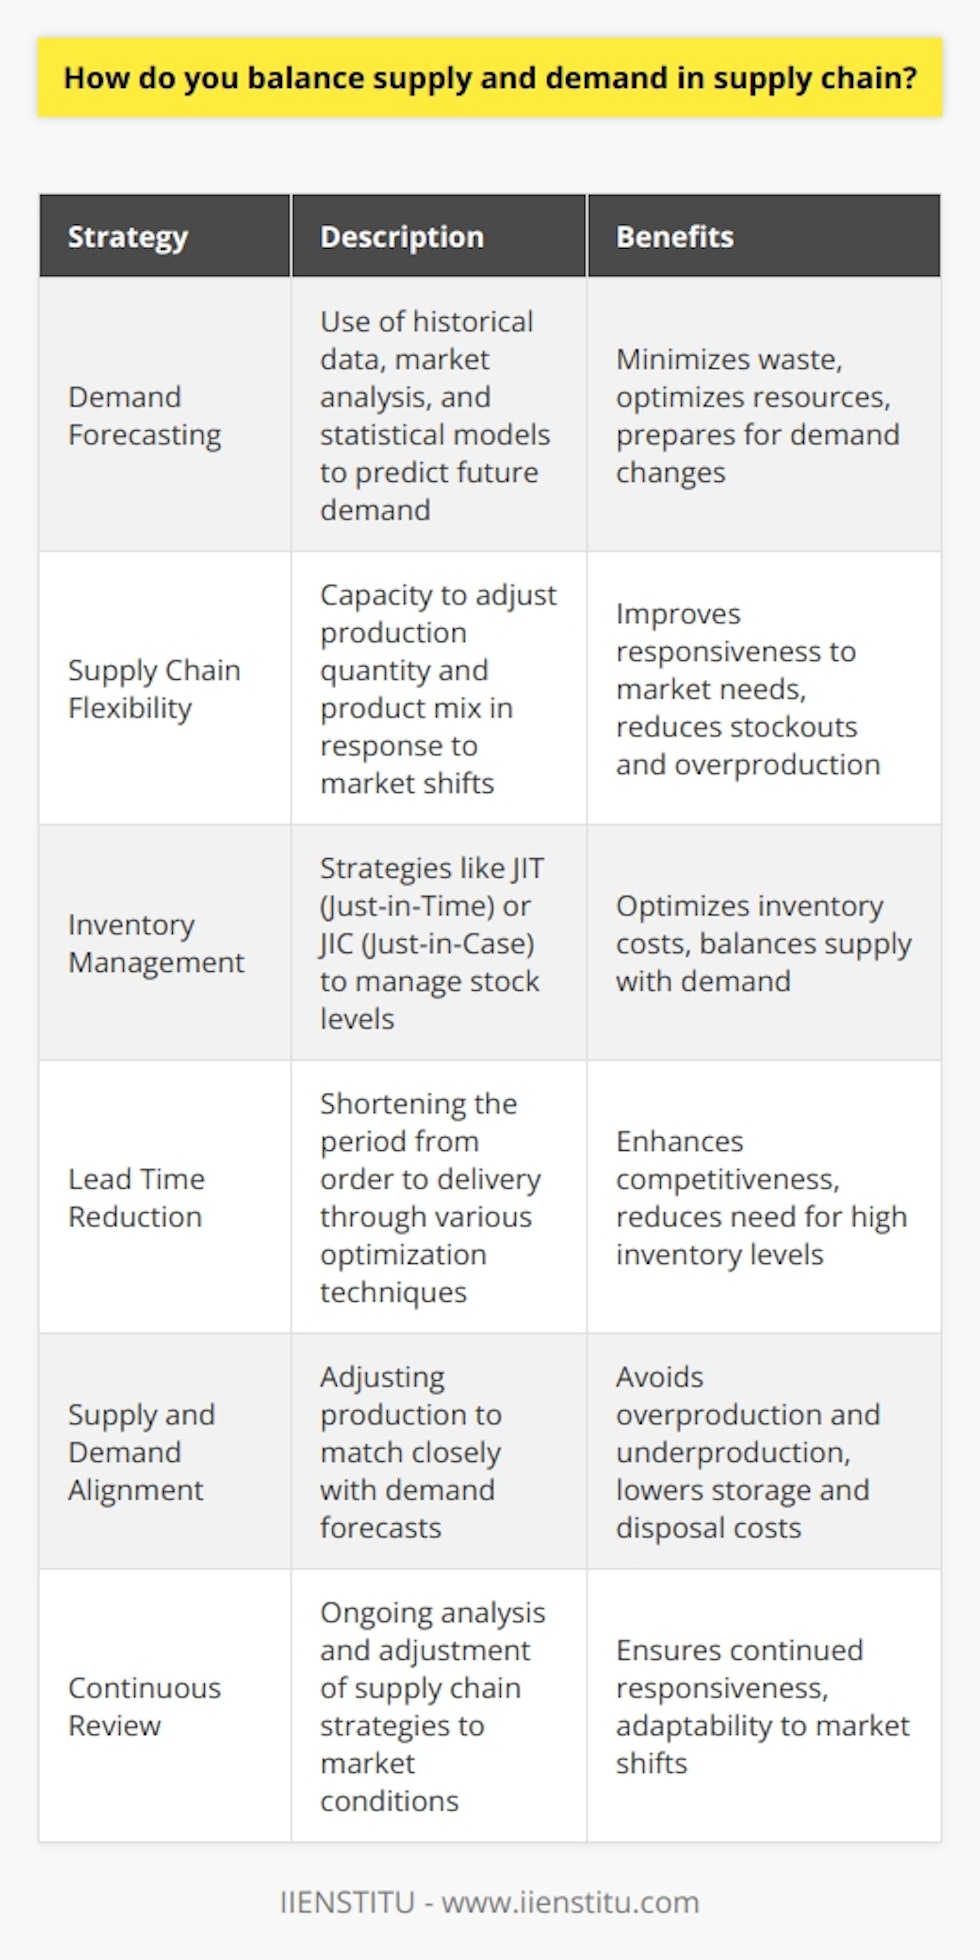 Achieving a balance between supply and demand within a supply chain is a critical but complex process. This equilibrium is essential for the cost-efficiency, sustainability, and customer satisfaction that are vital to a company's success. Here are some balancing mechanisms that are instrumental in managing this delicate balance:**Demand Forecasting**Accurate and effective demand forecasting stands at the core of supply chain management. Businesses employ sophisticated forecast systems that utilize historical data, market analysis, and statistical algorithms to predict demand. When done correctly, this foresight minimizes waste, optimizes resource allocation, and prepares the supply chain for future demand fluctuations.**Supply Chain Flexibility**Having a flexible supply chain allows a company to respond agilely to the changing needs of the market. Two major aspects of this are volume flexibility, which allows the production quantity to rise or fall in response to demand, and mix flexibility, which accommodates shifts in product variety as dictated by consumers' preferences and trends.**Inventory Management**Strategically managing inventory is critical. Just-in-time (JIT) inventory systems are designed to decrease holding costs by ordering goods only as needed. A contrasting approach is the just-in-case strategy, which keeps additional stock on hand to act as a buffer against sudden demand spikes.**Lead Time Reduction**A shorter lead time - the period from order to delivery - provides a competitive edge. It allows companies to be more responsive, reducing the need to hold large quantities of inventory. This can be achieved through techniques like process optimization, supplier management, and technological integration.**Supply and Demand Alignment**Ensuring that supply levels closely match demand predictions is essential. This means avoiding overproduction, which can result in unsold goods and unnecessary storage and disposal costs, and preventing underproduction, which can lead to stockouts and dissatisfied customers.**Continuous Review**Market conditions are consistently in flux, so supply chain strategies require regular review. Continuous analysis and adjustment of forecasts, production plans, and inventory levels ensure that the company remains responsive and adaptive to market needs.By implementing these strategies, a supply chain can not only respond to current market conditions but also anticipate and prepare for future changes. This responsive approach requires a robust supply chain infrastructure, a commitment to data analytics, and a culture of flexibility. When executed effectively, supply chain management can serve as a strategic advantage, fostering resilience, efficiency, and customer loyalty.